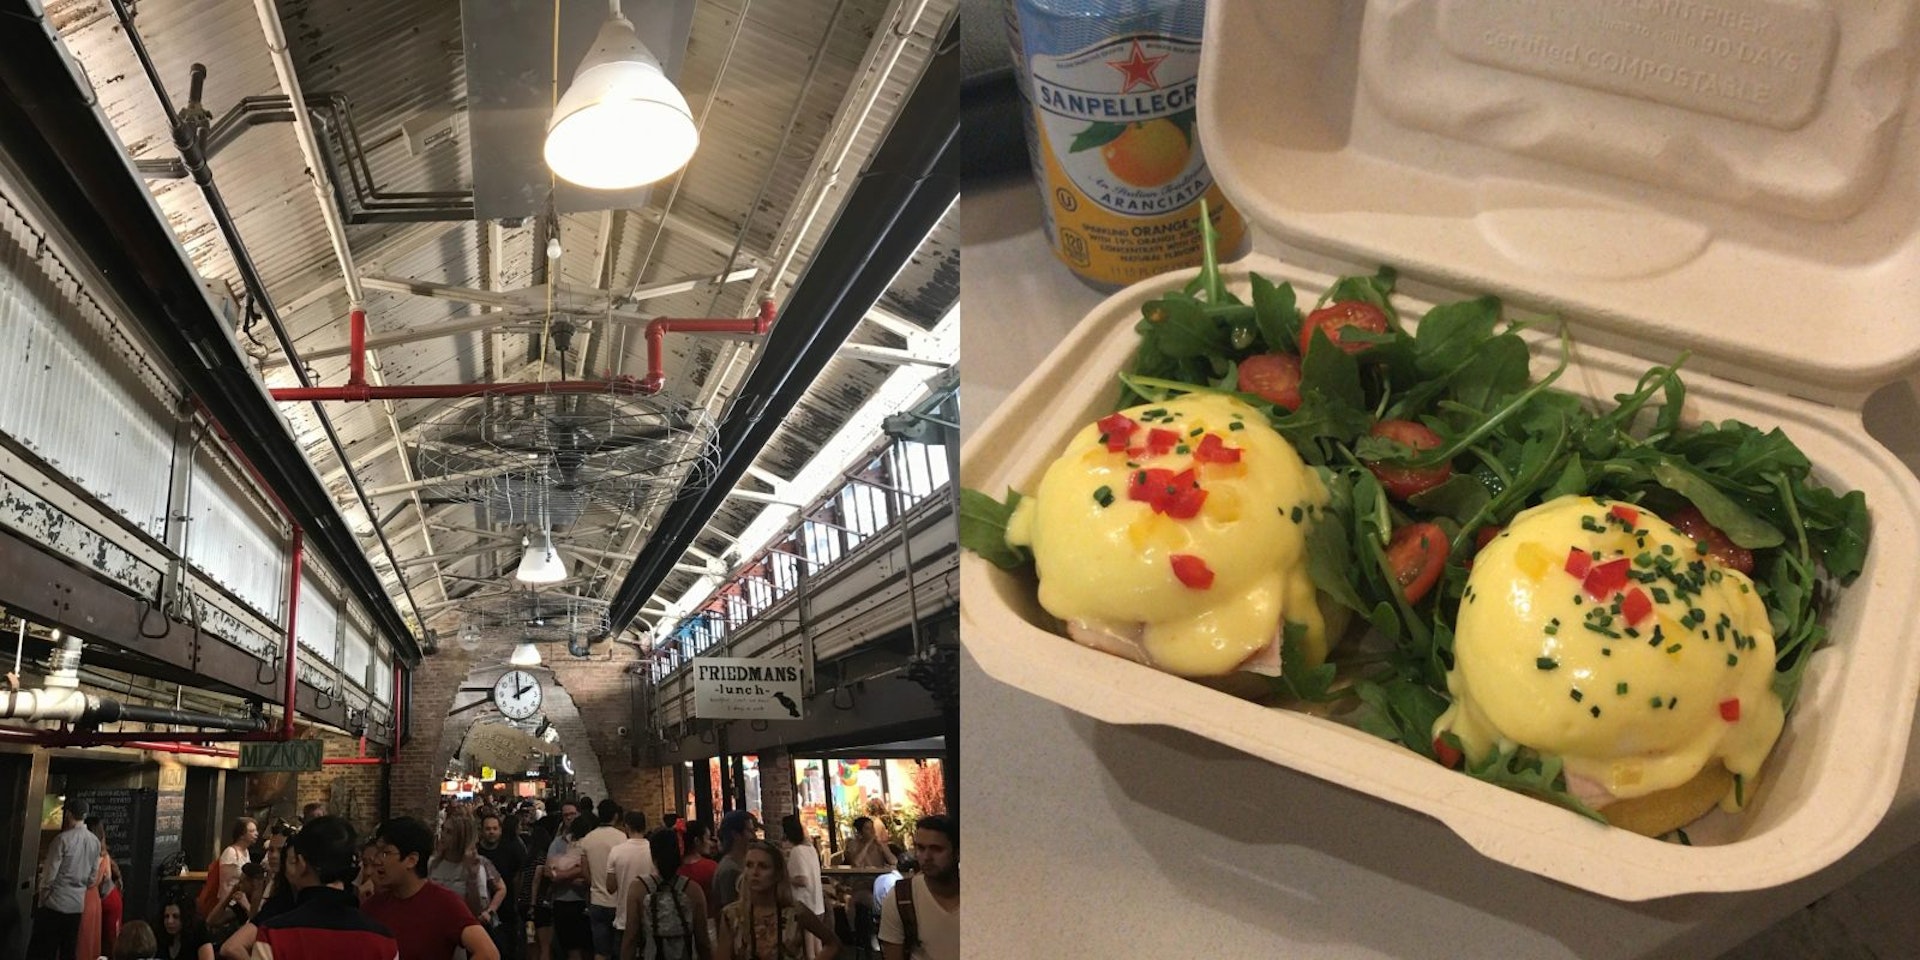 Two images: the right image is an interior shot of Chelsea Market with people milling around the various dining options. The left image is a close up of eggs benedict in a carton from Sarabeth's Bakery. A can of San Pellegrino sits to the left of the container.